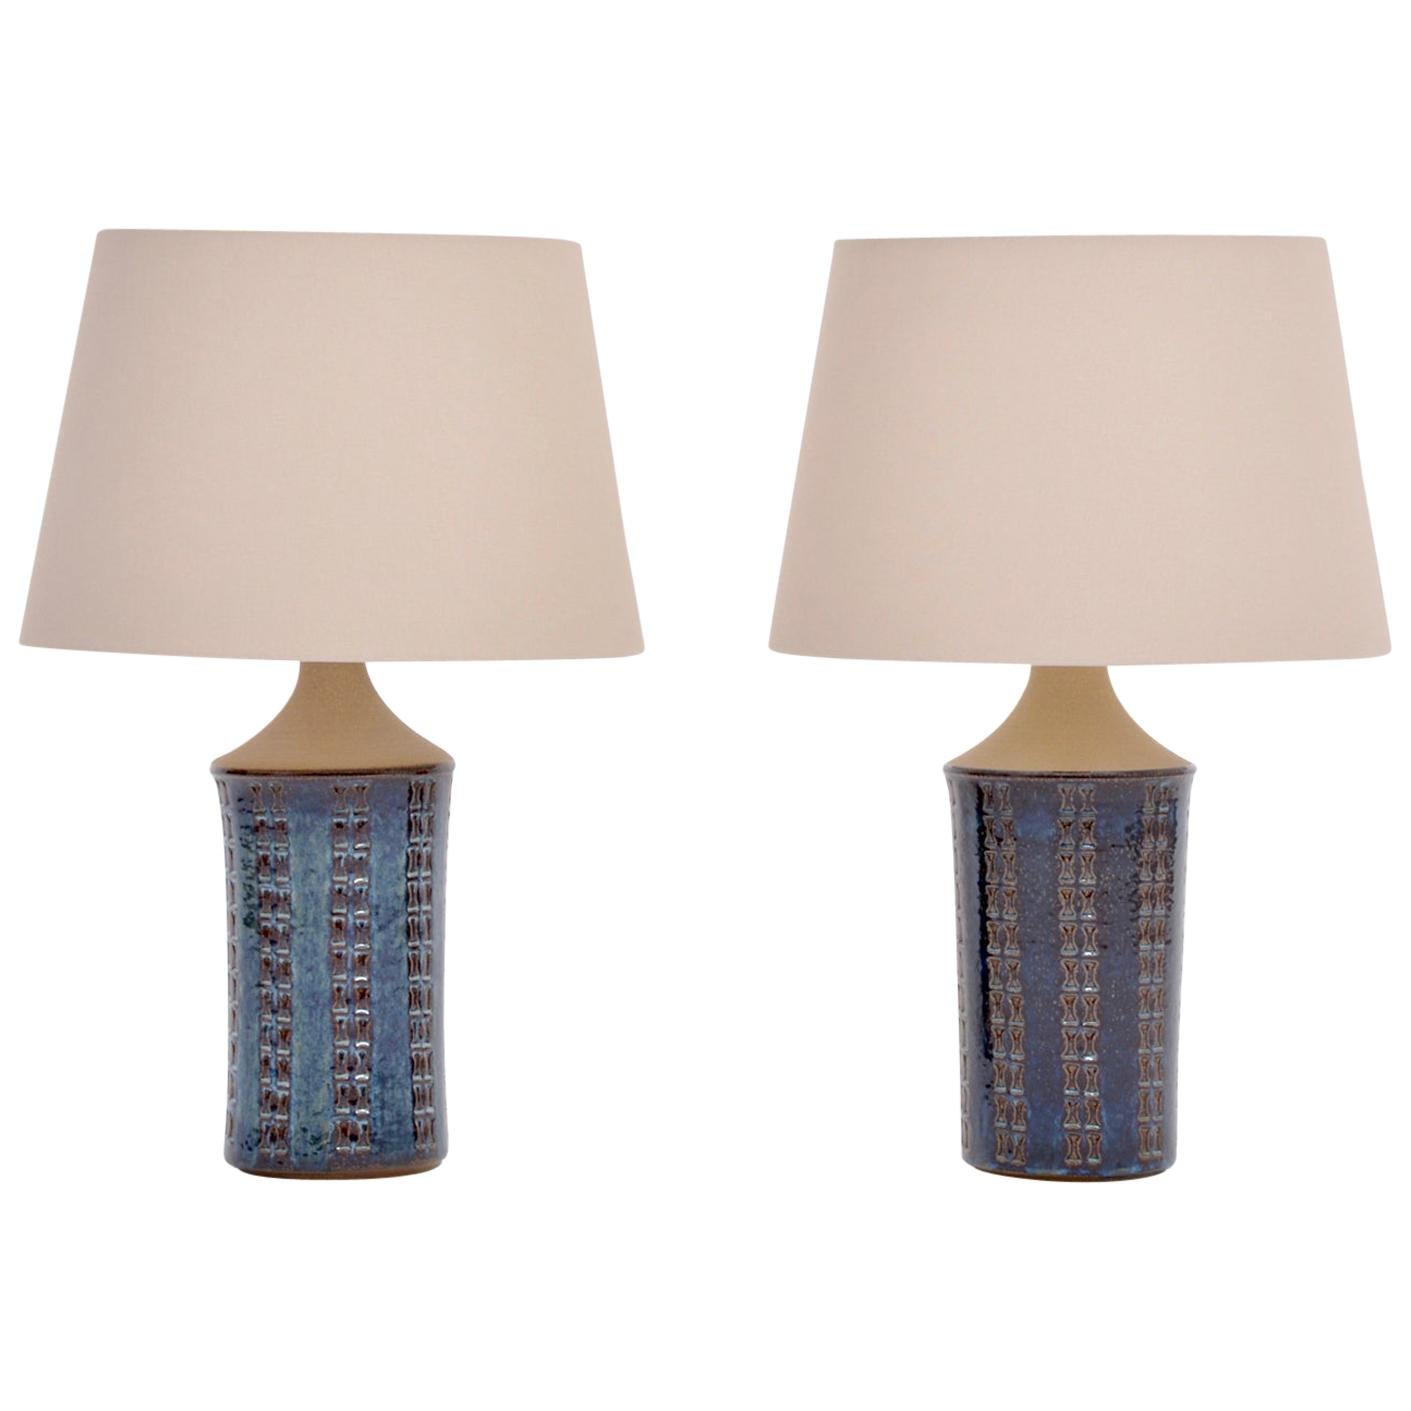 Pair of Tall Blue Mid-Century Modern Table Lamps by Maria Philippi for Soholm